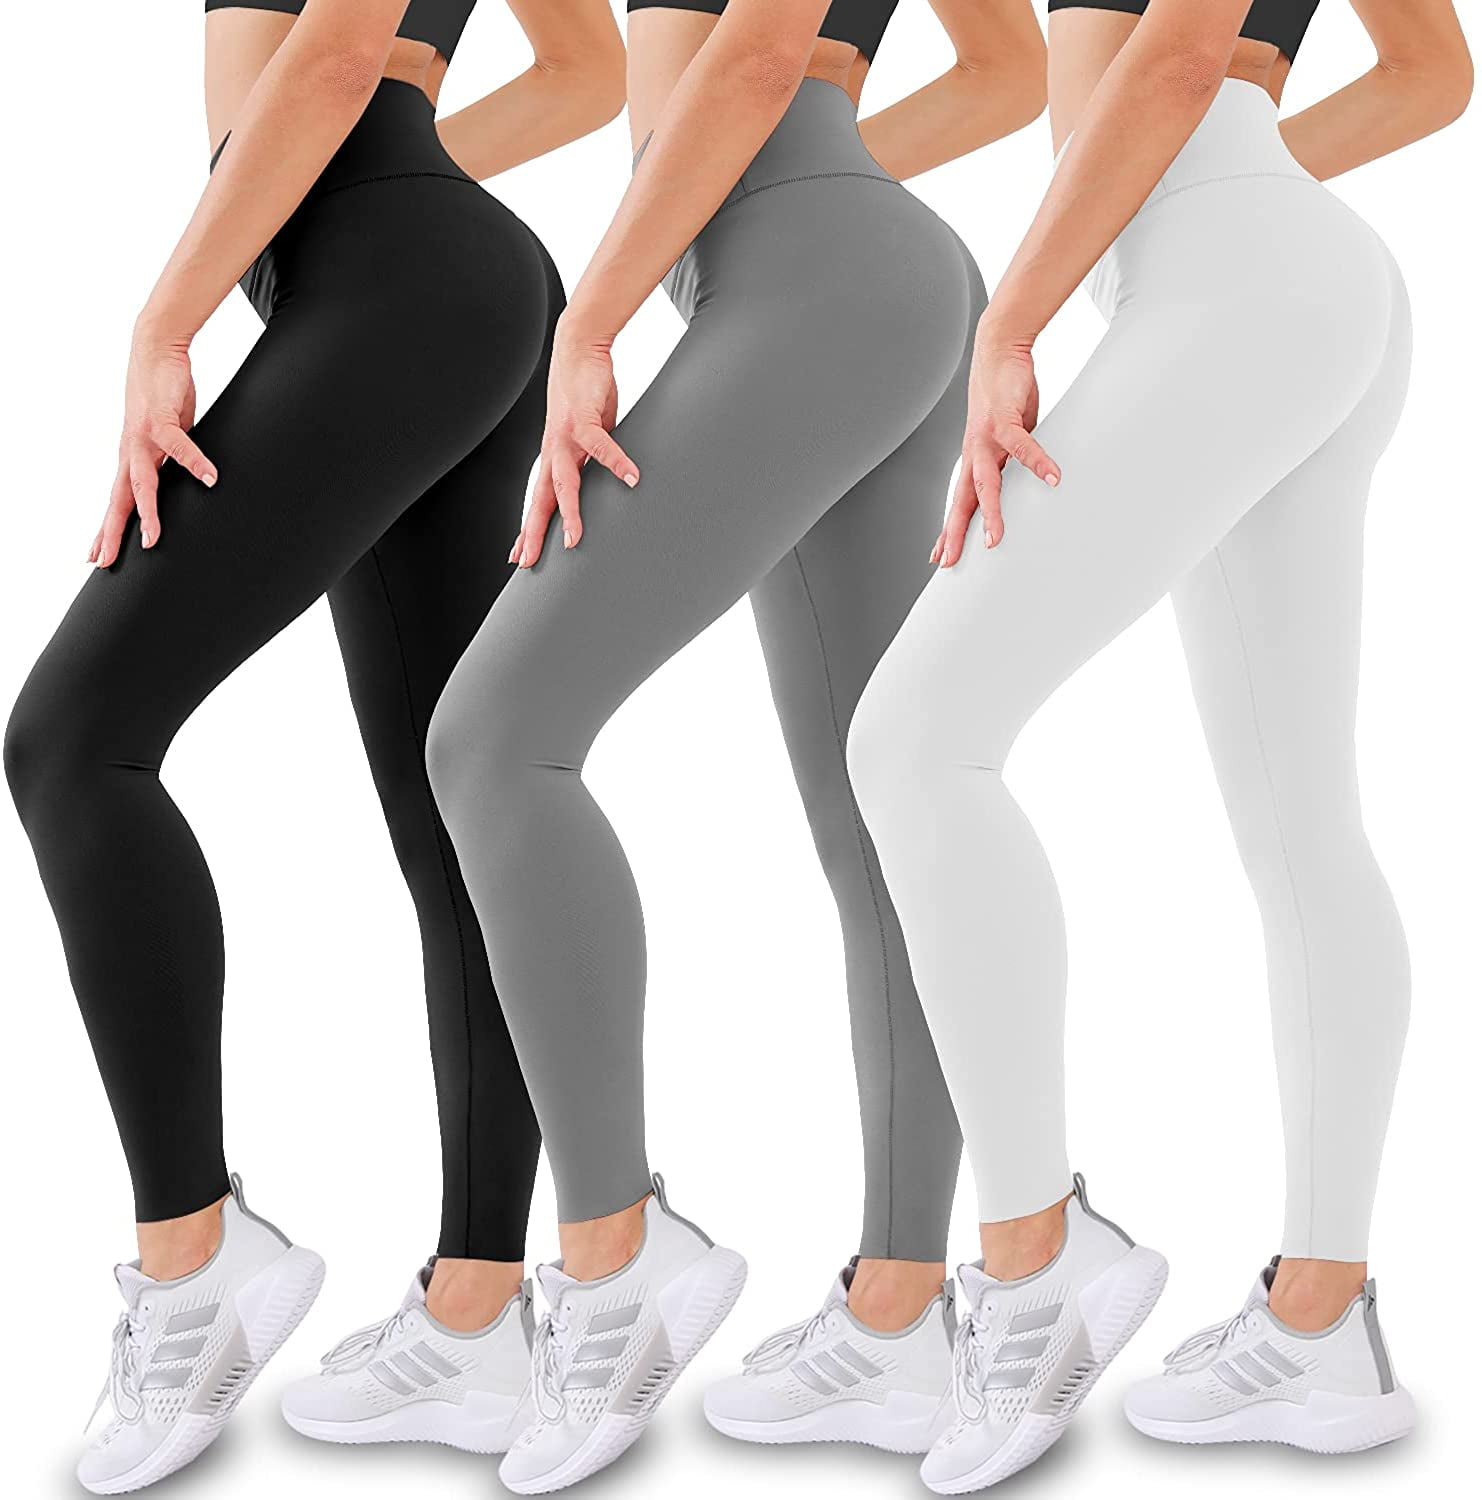 3 or 4 Pack Womens Leggings-No See-Through High Waisted Tummy Control Yoga Pants Workout Running Legging 